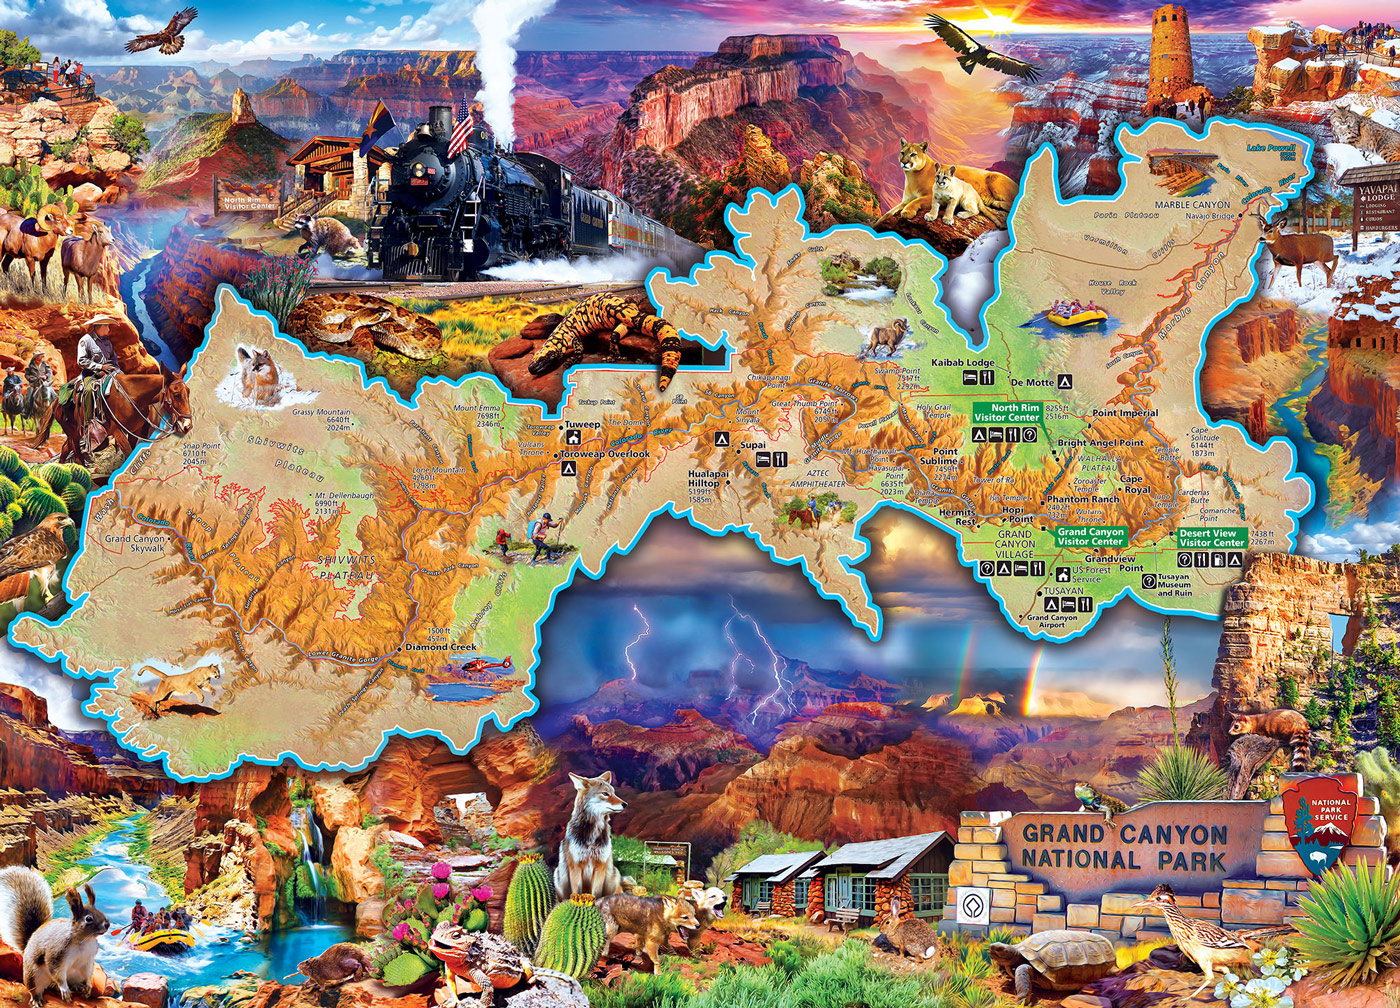 National Park - Grand Canyon Maps / Geography Jigsaw Puzzle